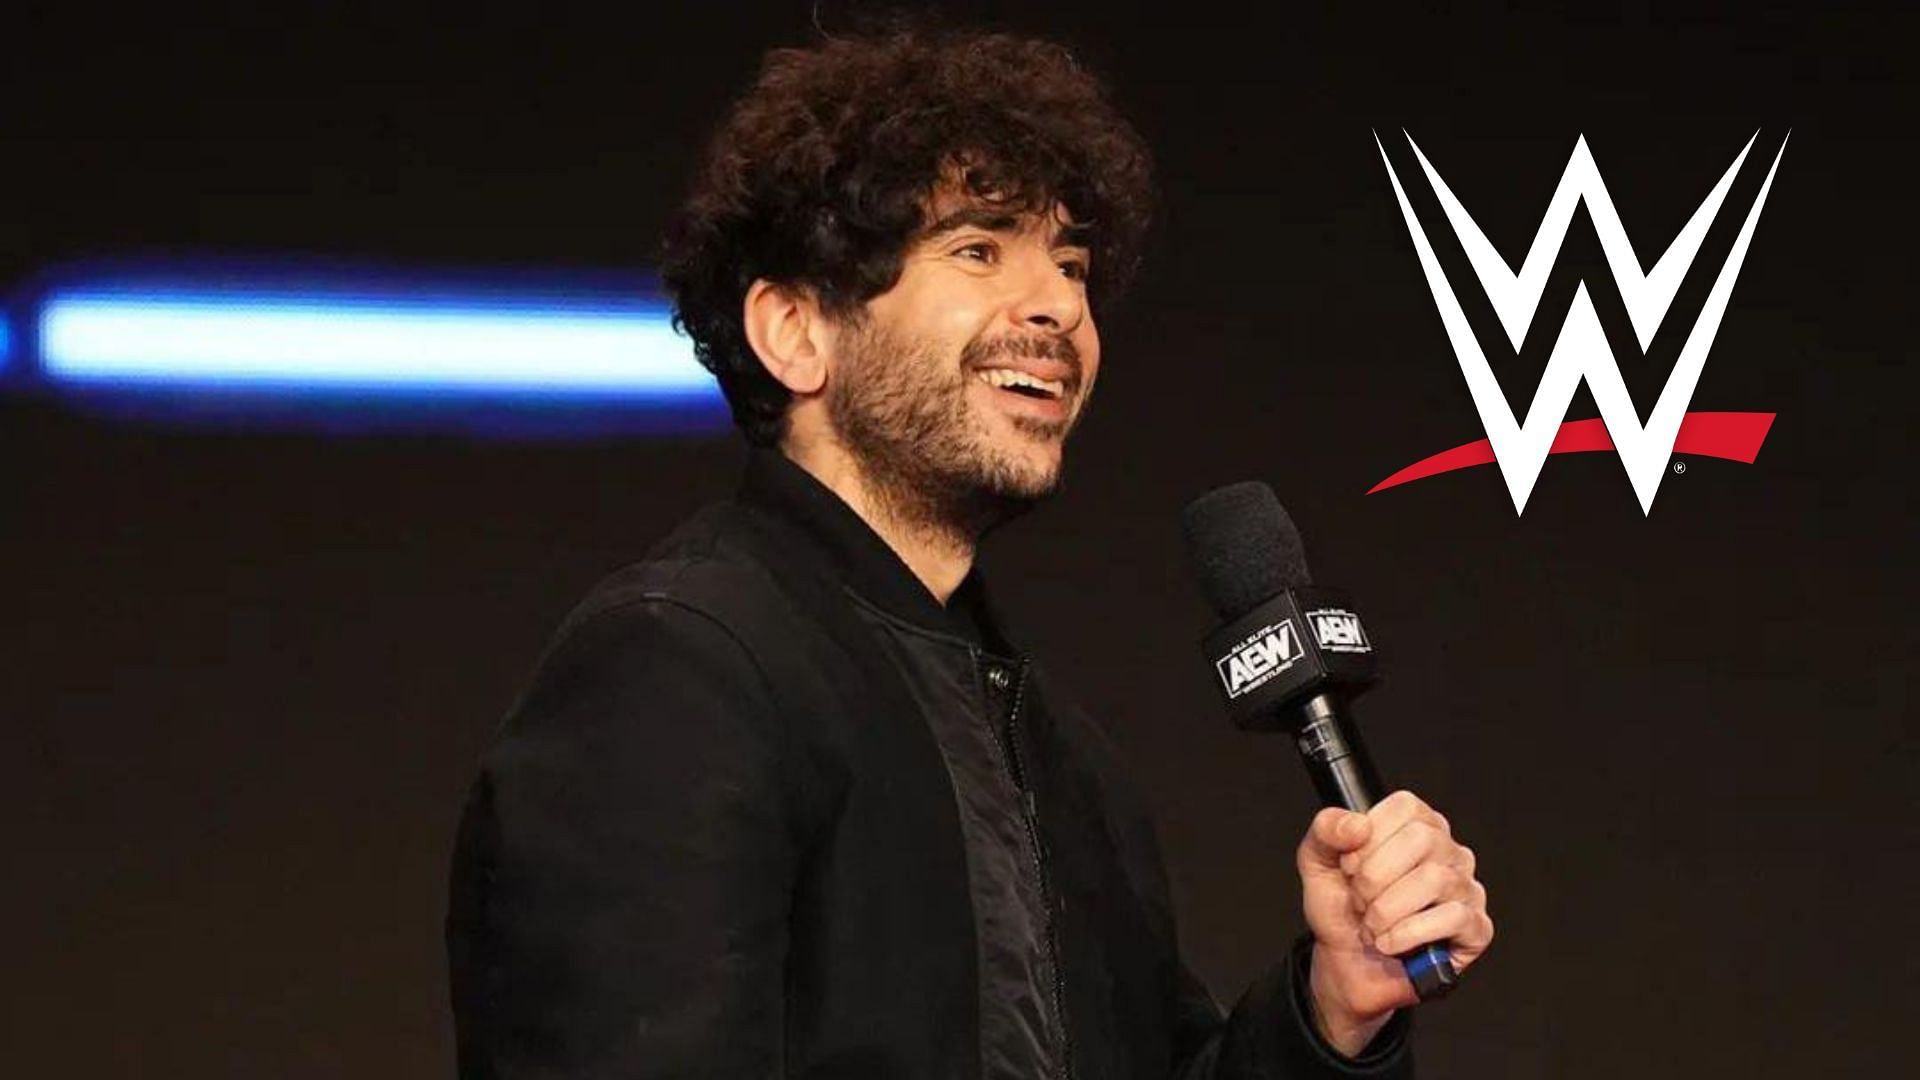  Tony Khan announces big signing of former WWE Superstar